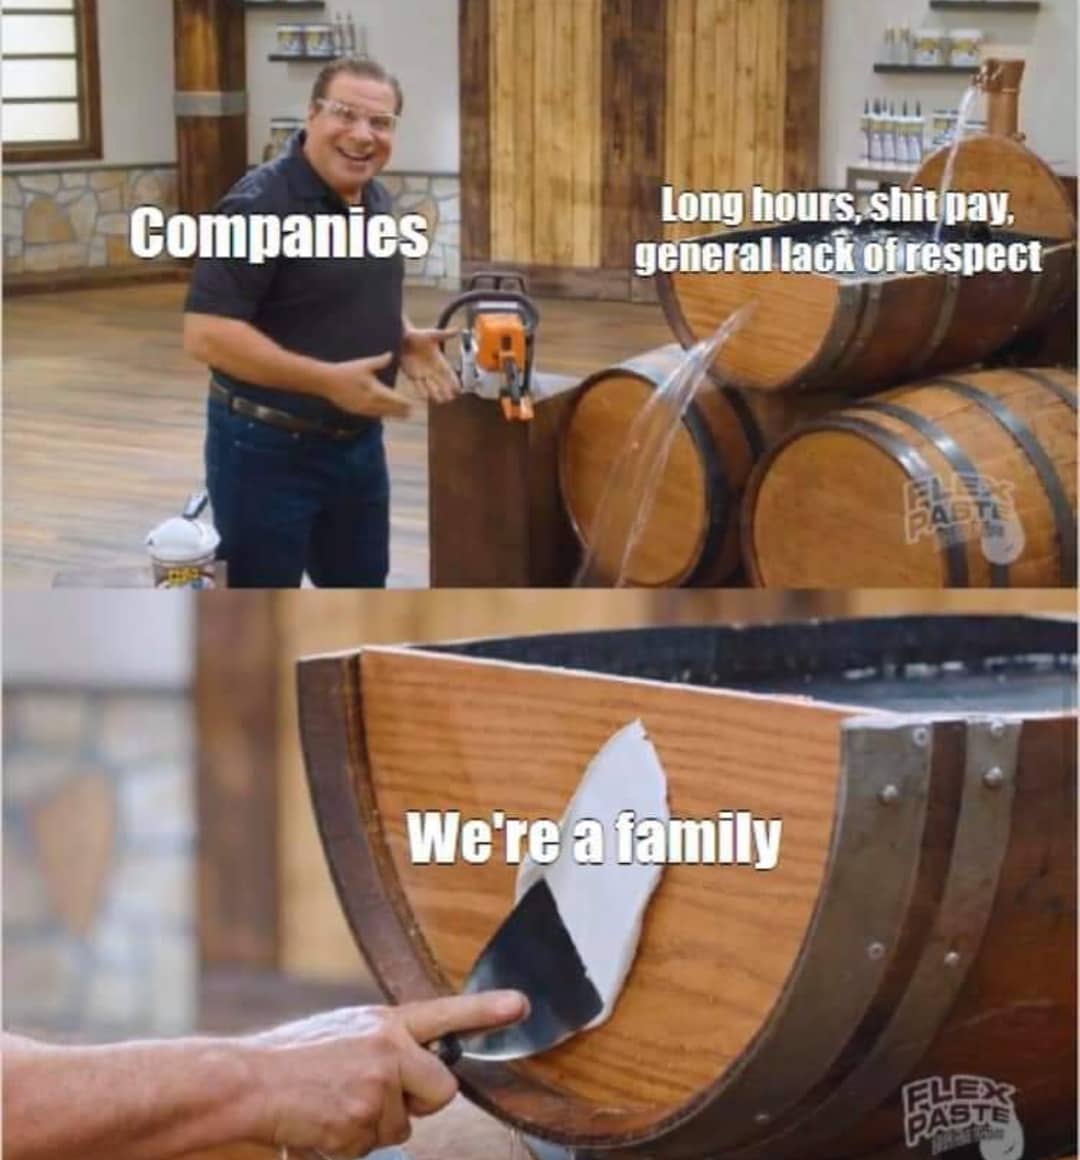 Internet meme - Companies Long hours, shit pay, general lack of respect We're a family